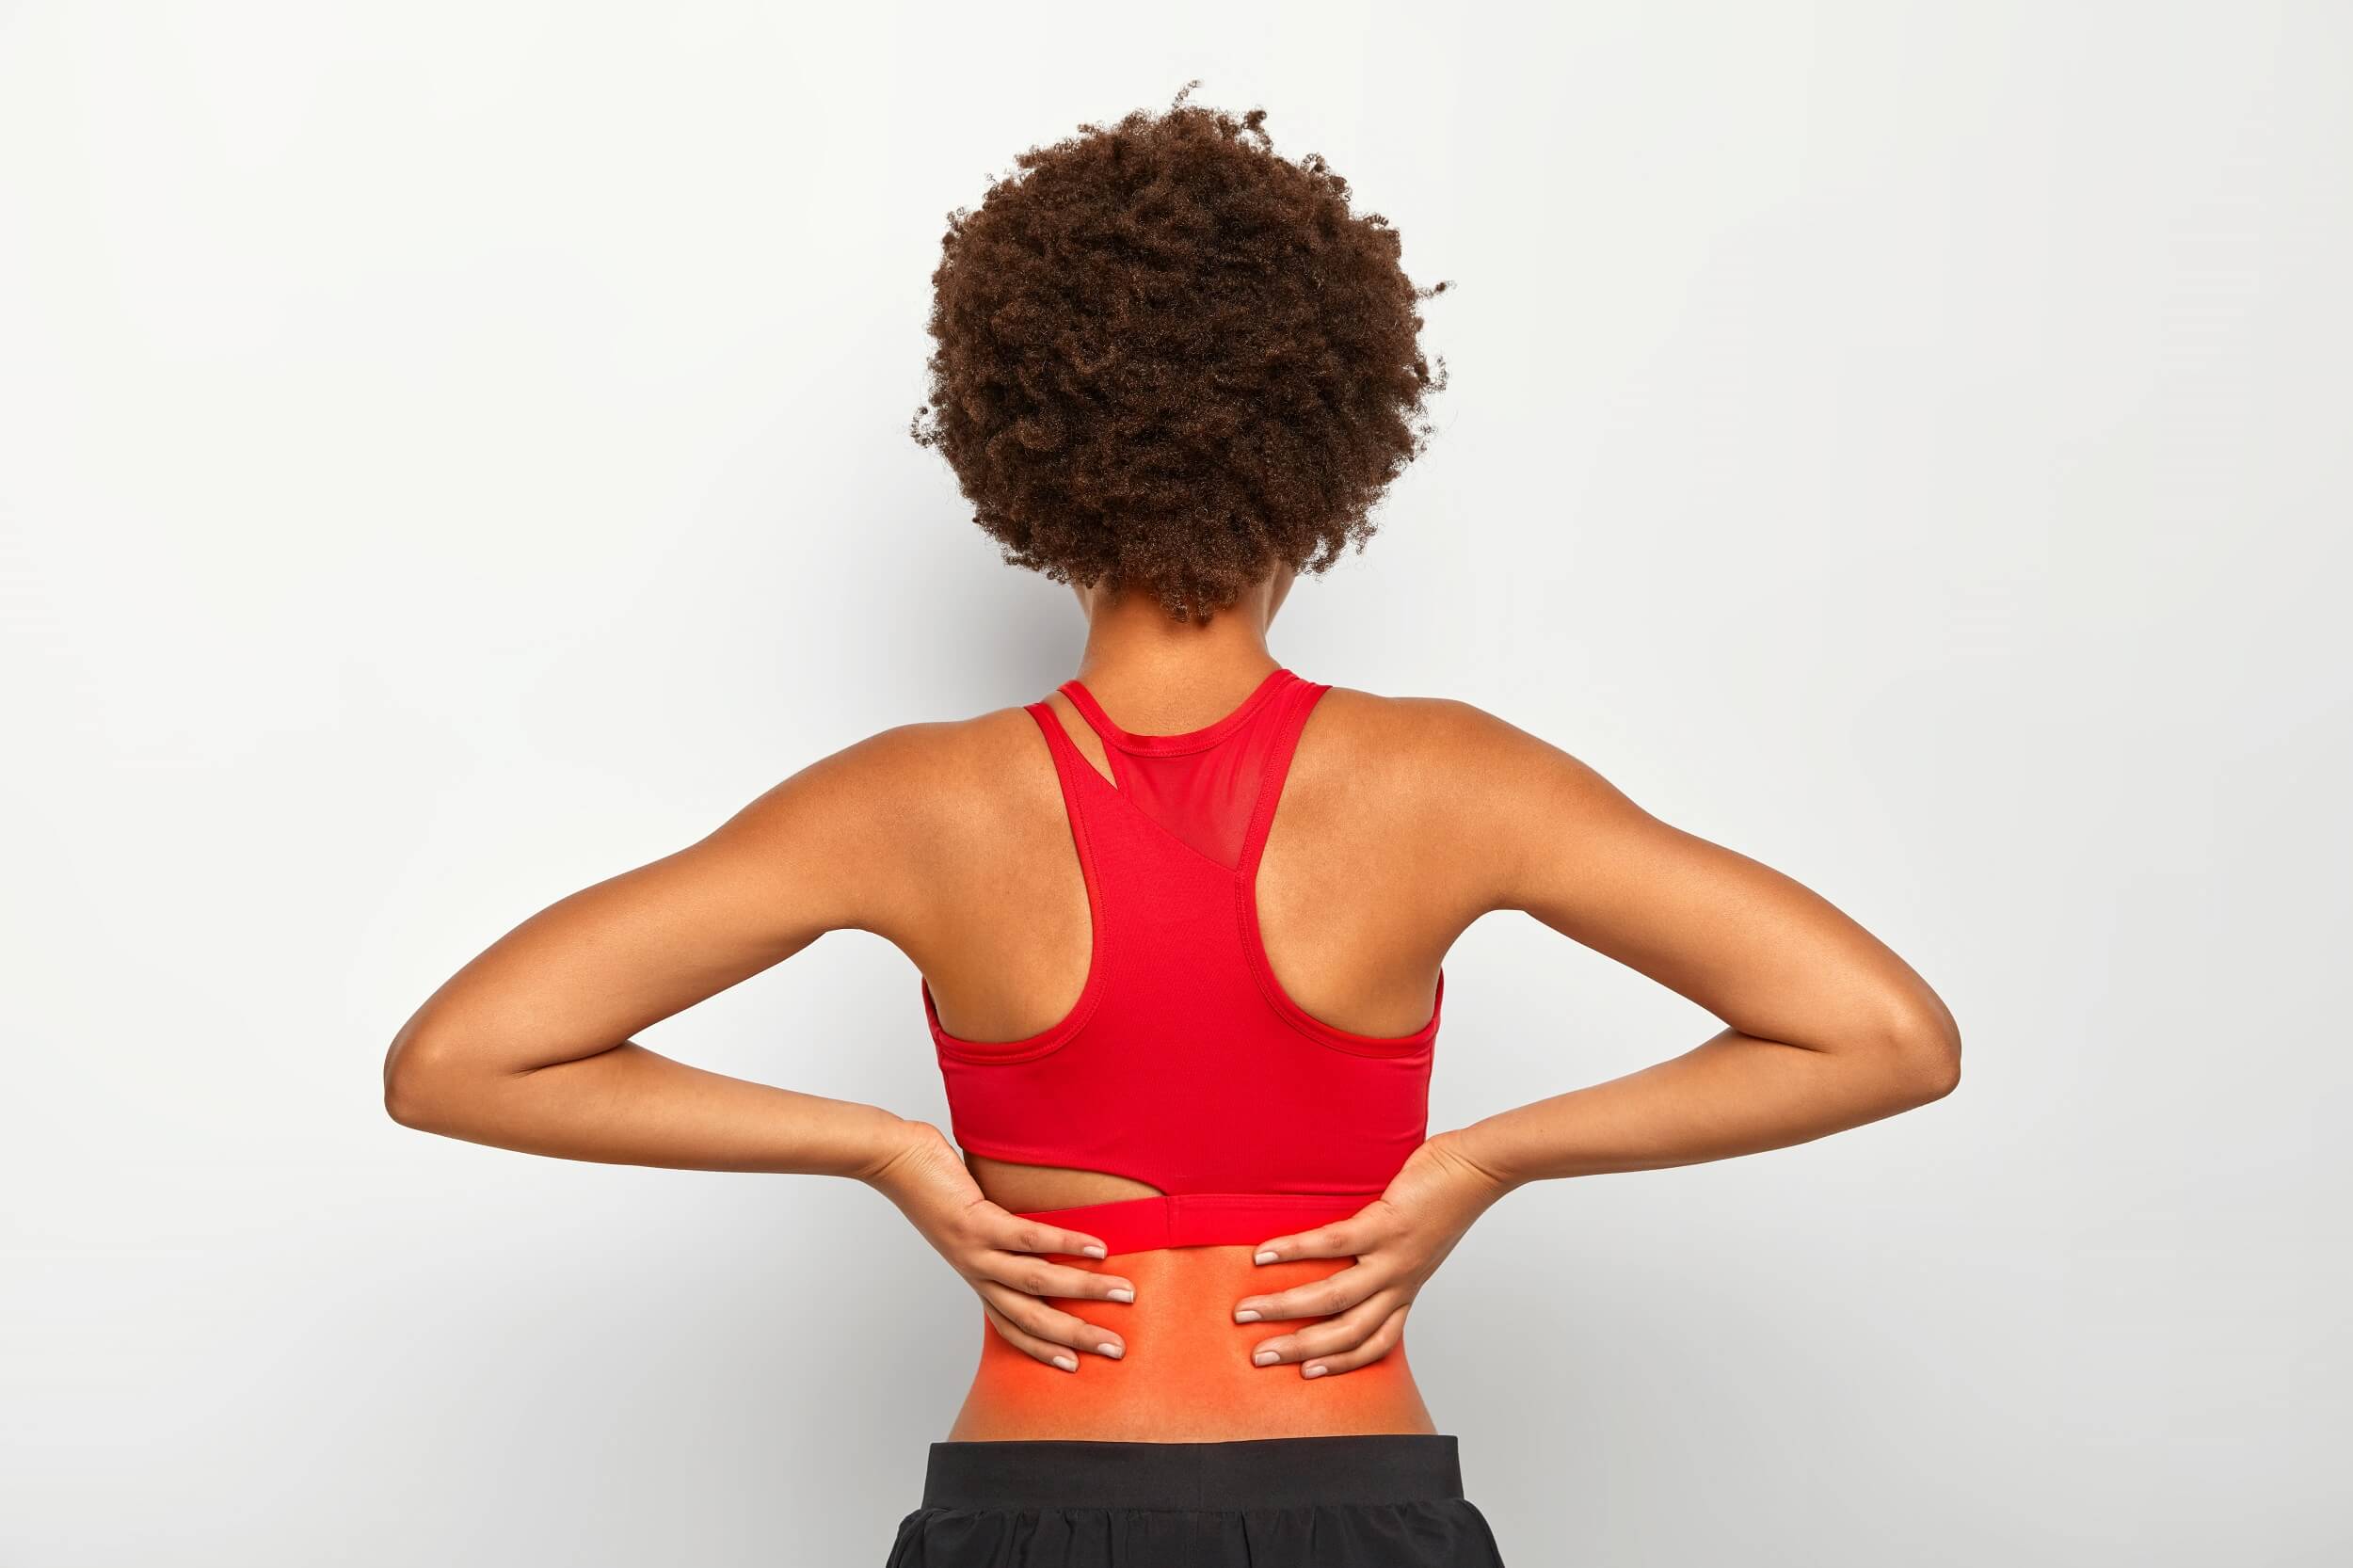 Herniated Disc in Lower Back - Dr. Kevin Pauza